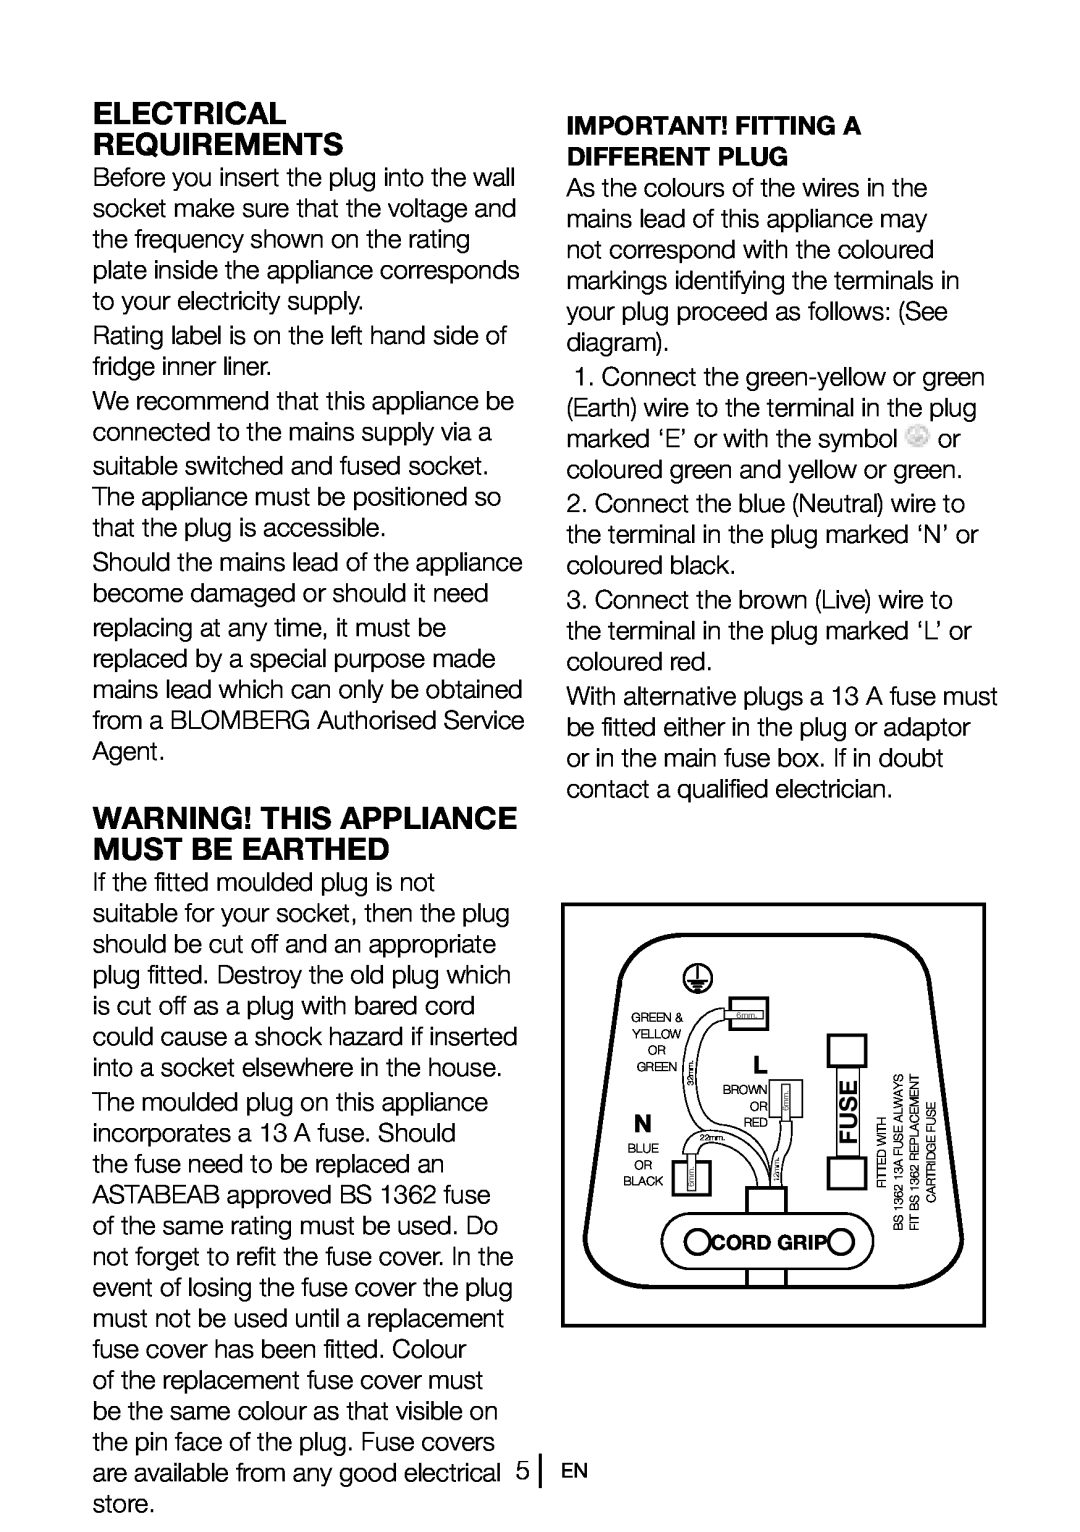 Blomberg KGM 9550 Electrical Requirements, Warning! This Appliance Must Be Earthed, Important! Fitting A Different Plug 